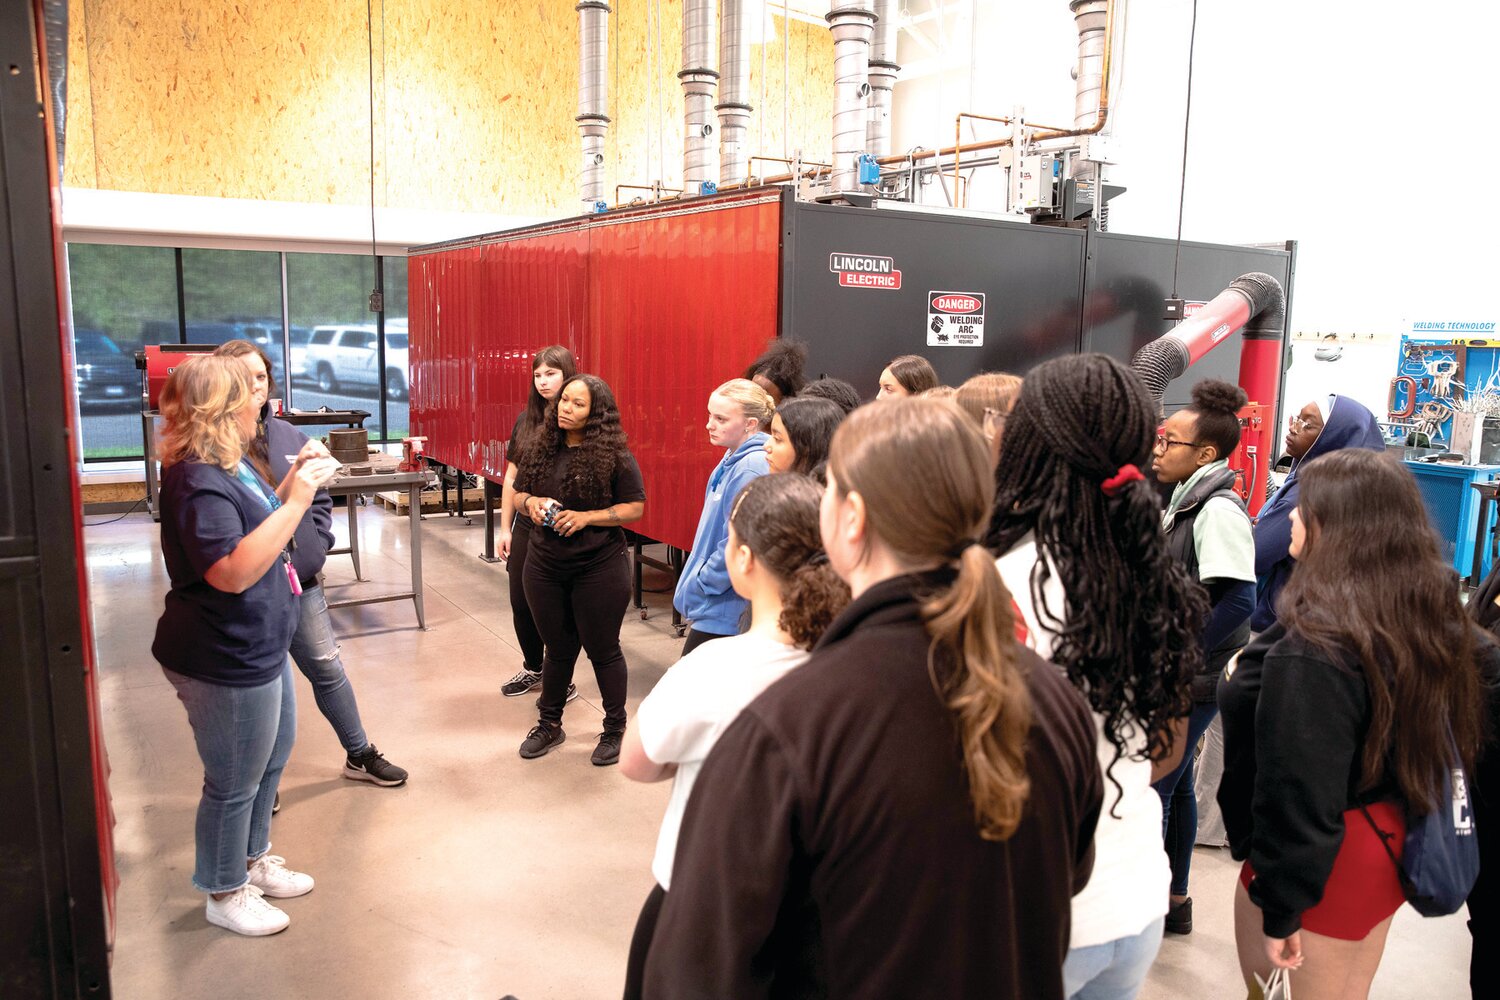 Approximately 60 middle school girls participated in a variety of speaker sessions and hands-on activities including welding, construction, electrical and firefighting.